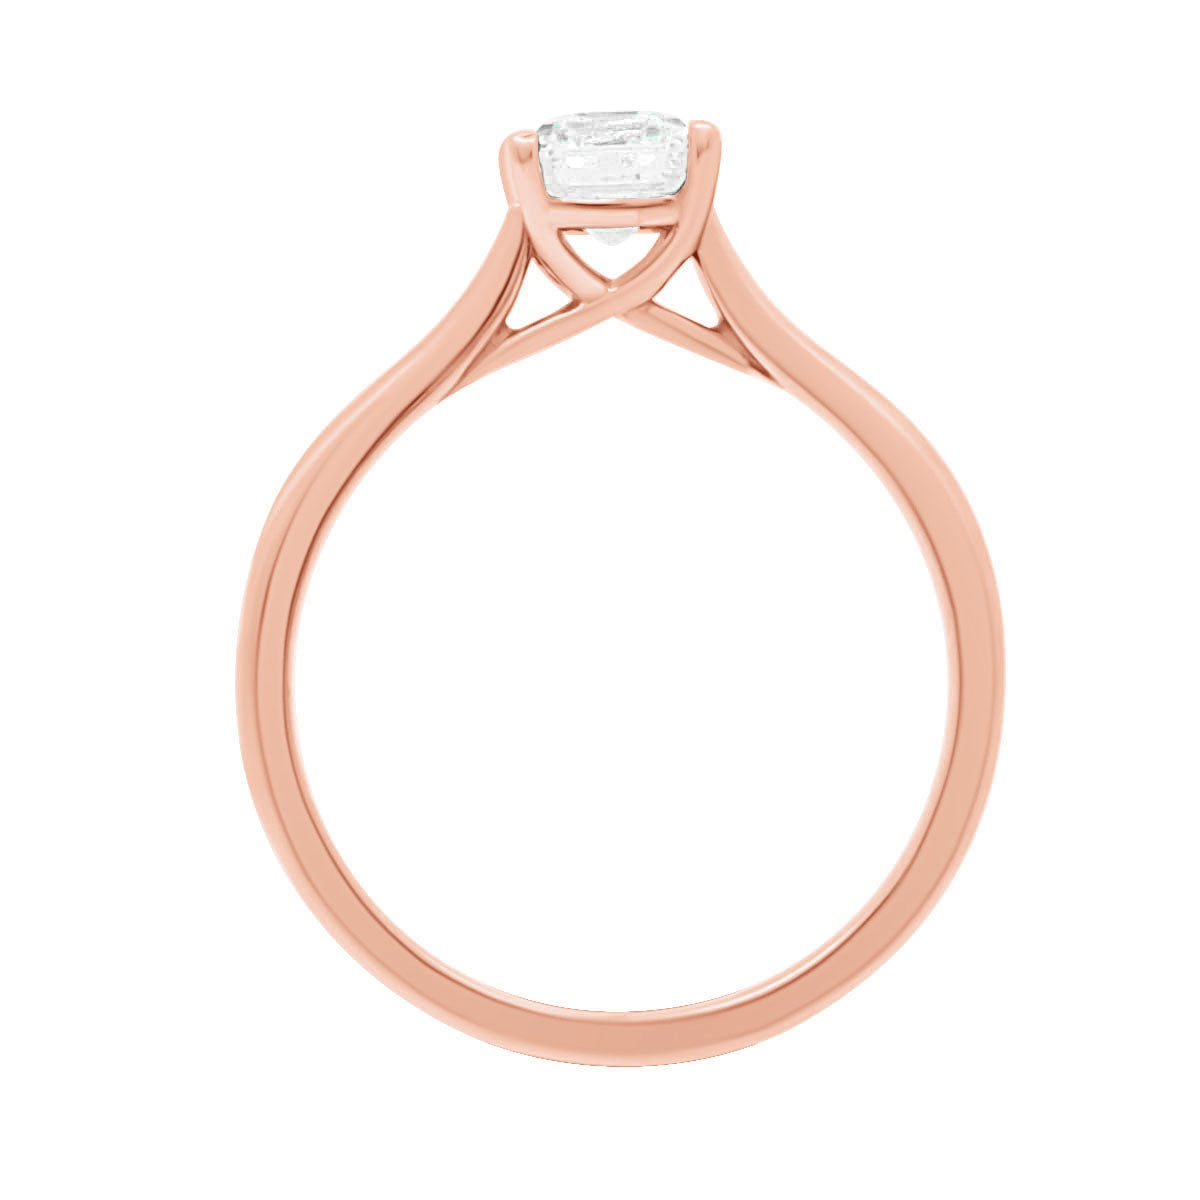 Emerald cut solitaire engagement ring IN rose Gold in an upright position